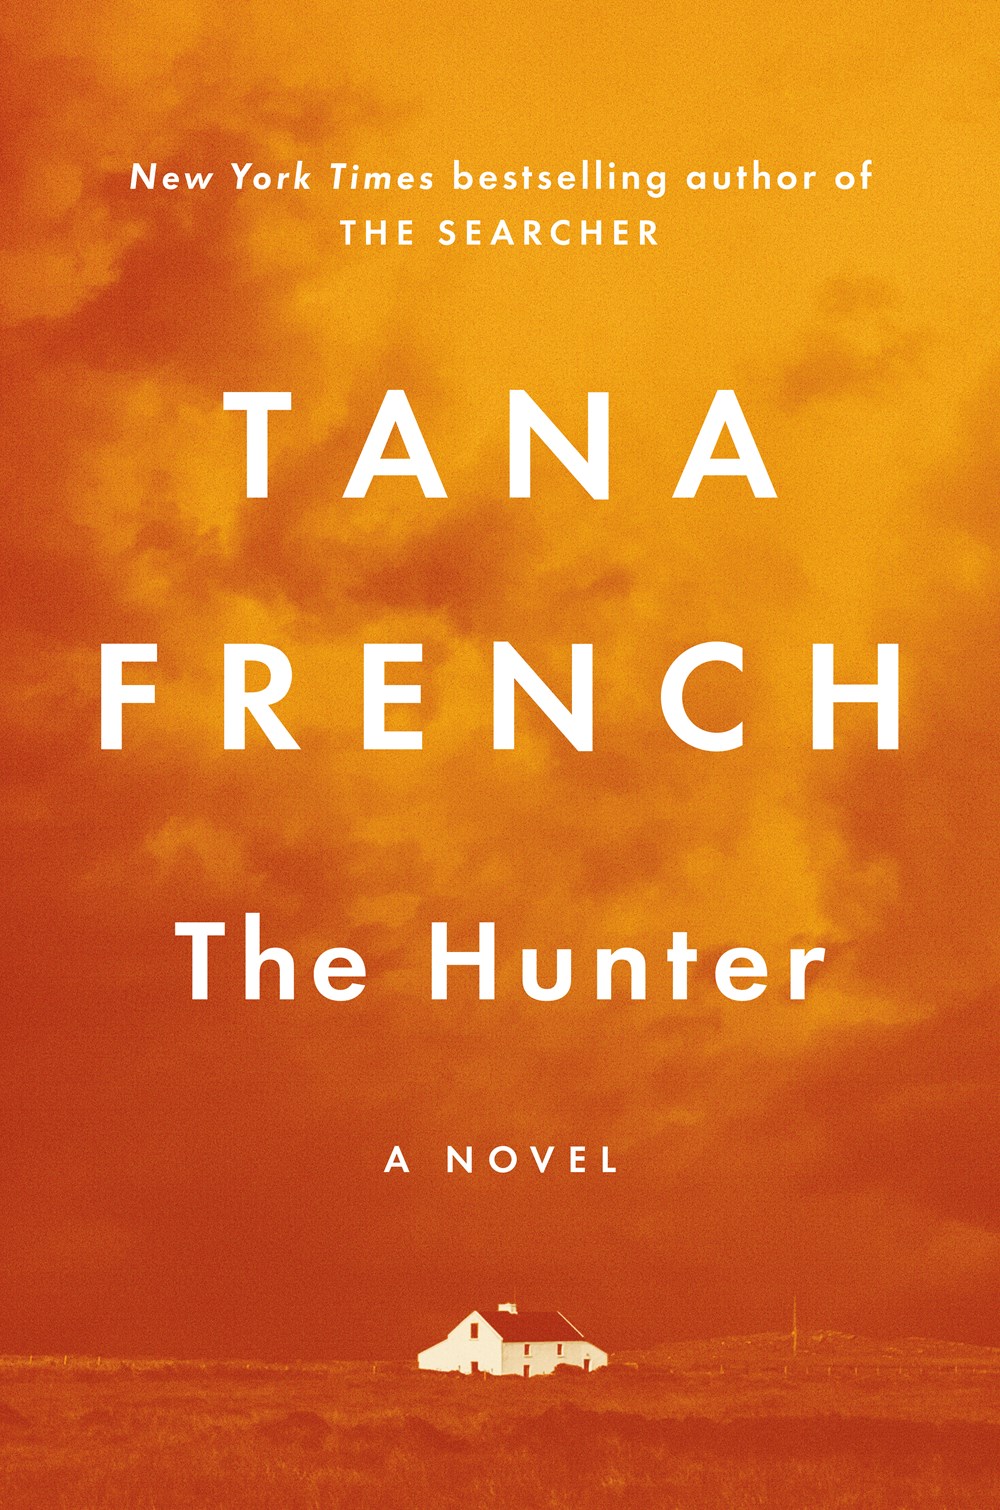 Read-Alikes for ‘The Hunter’ by Tana French | LibraryReads